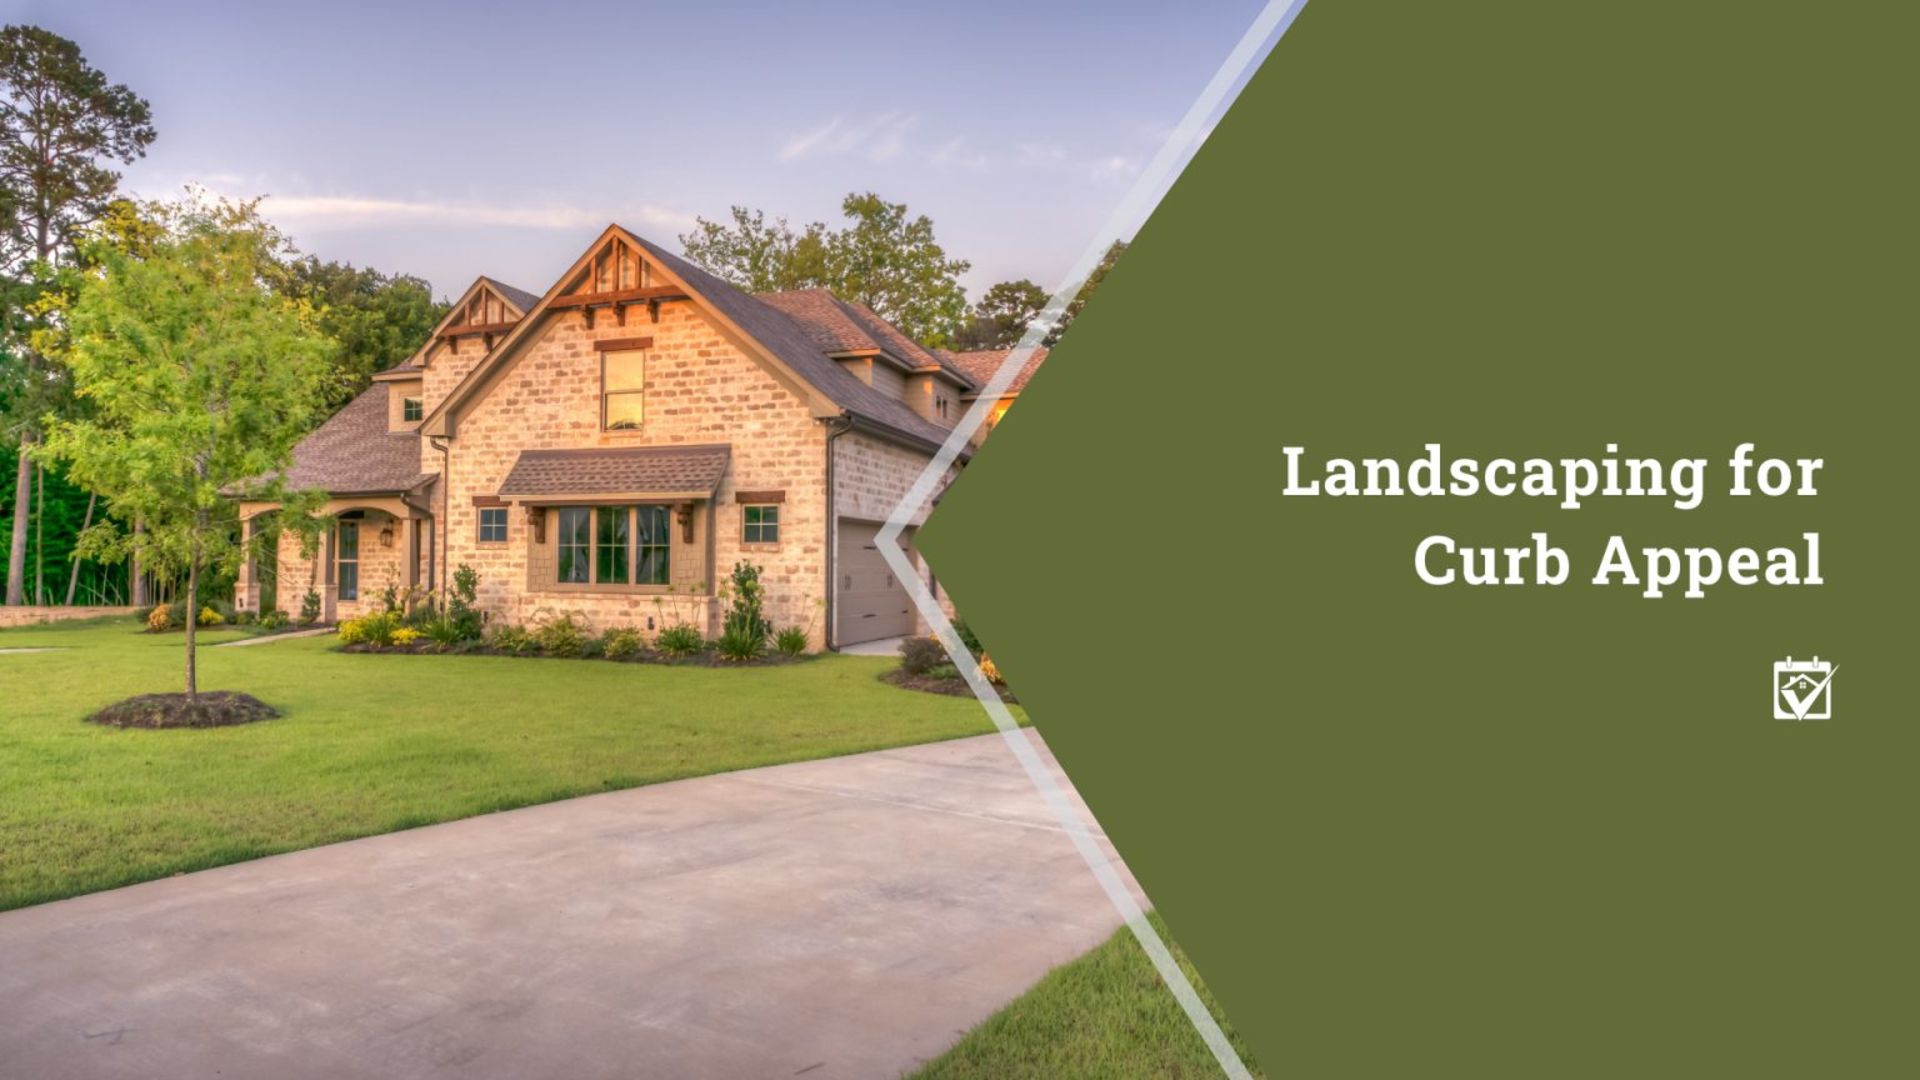 Landscaping for Curb Appeal